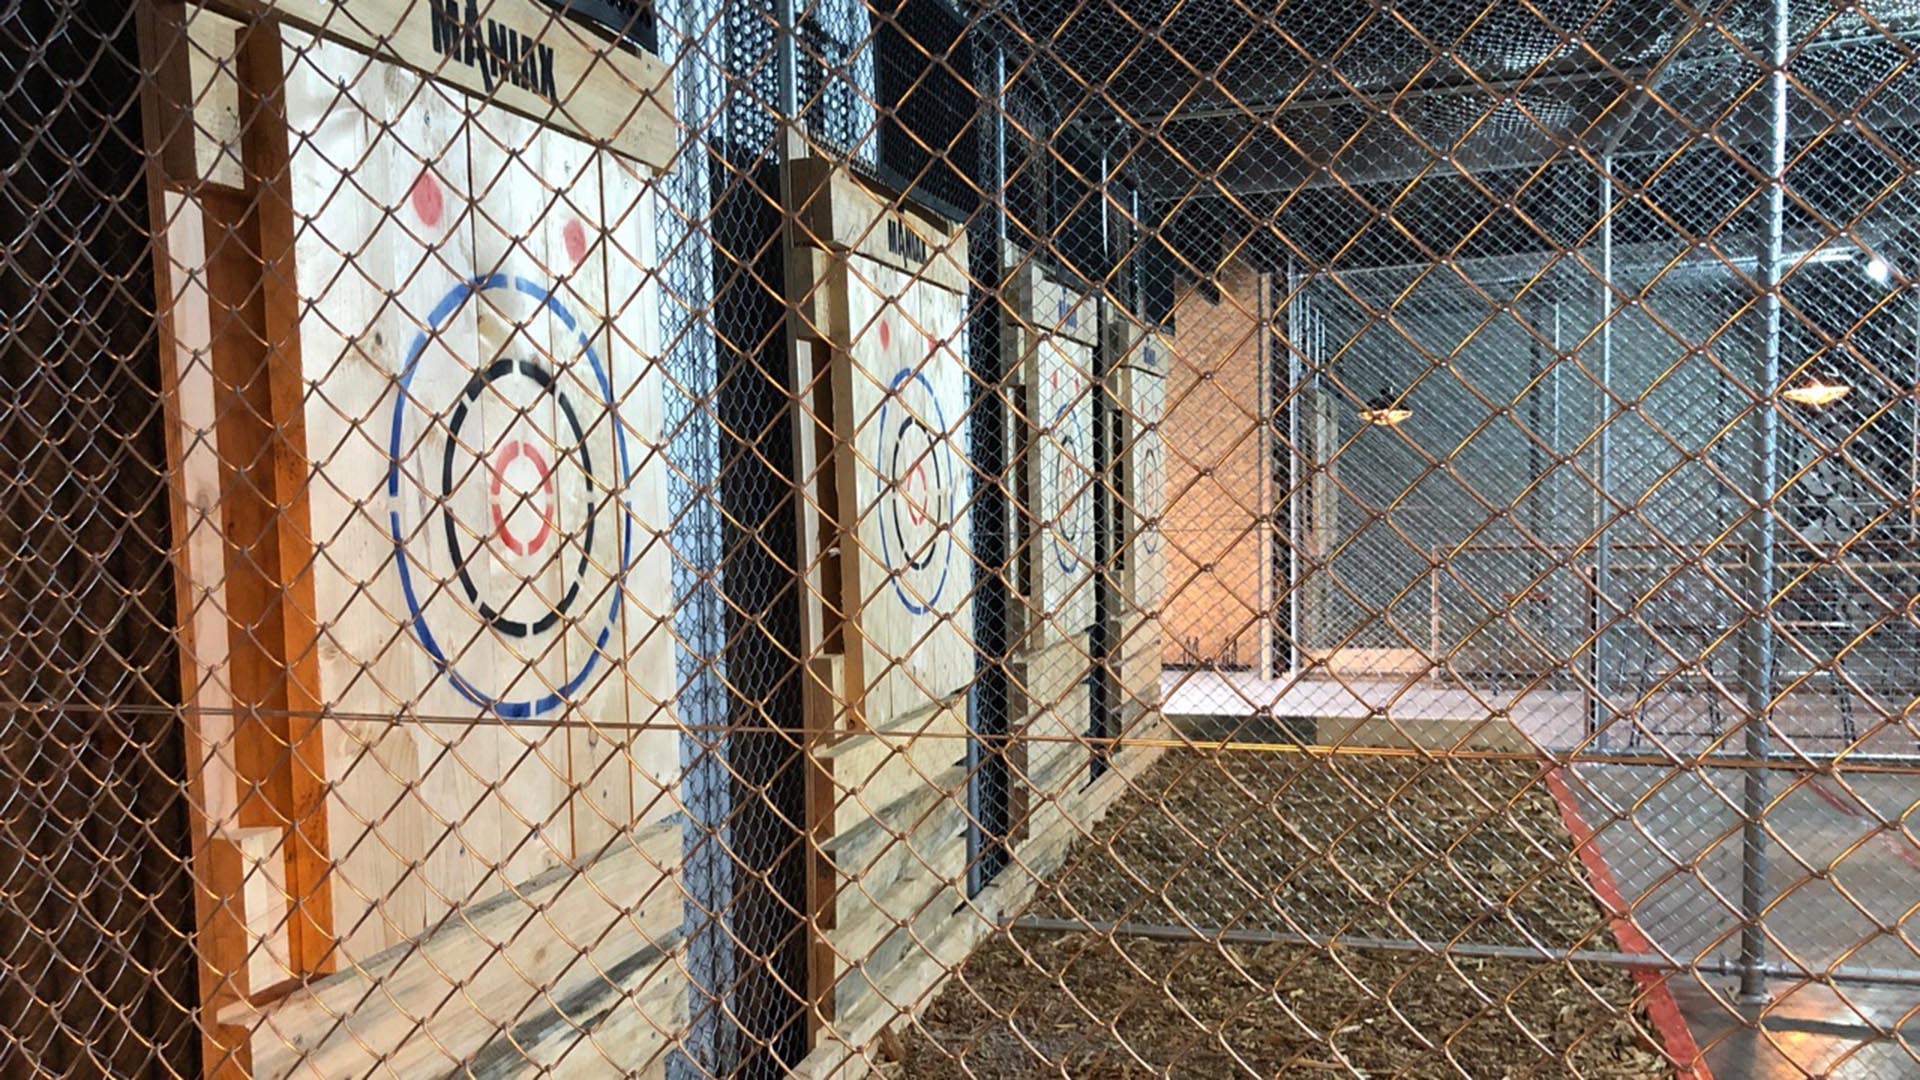 Brisbane Is Now Home to Australia's First Licensed Axe-Throwing Joint